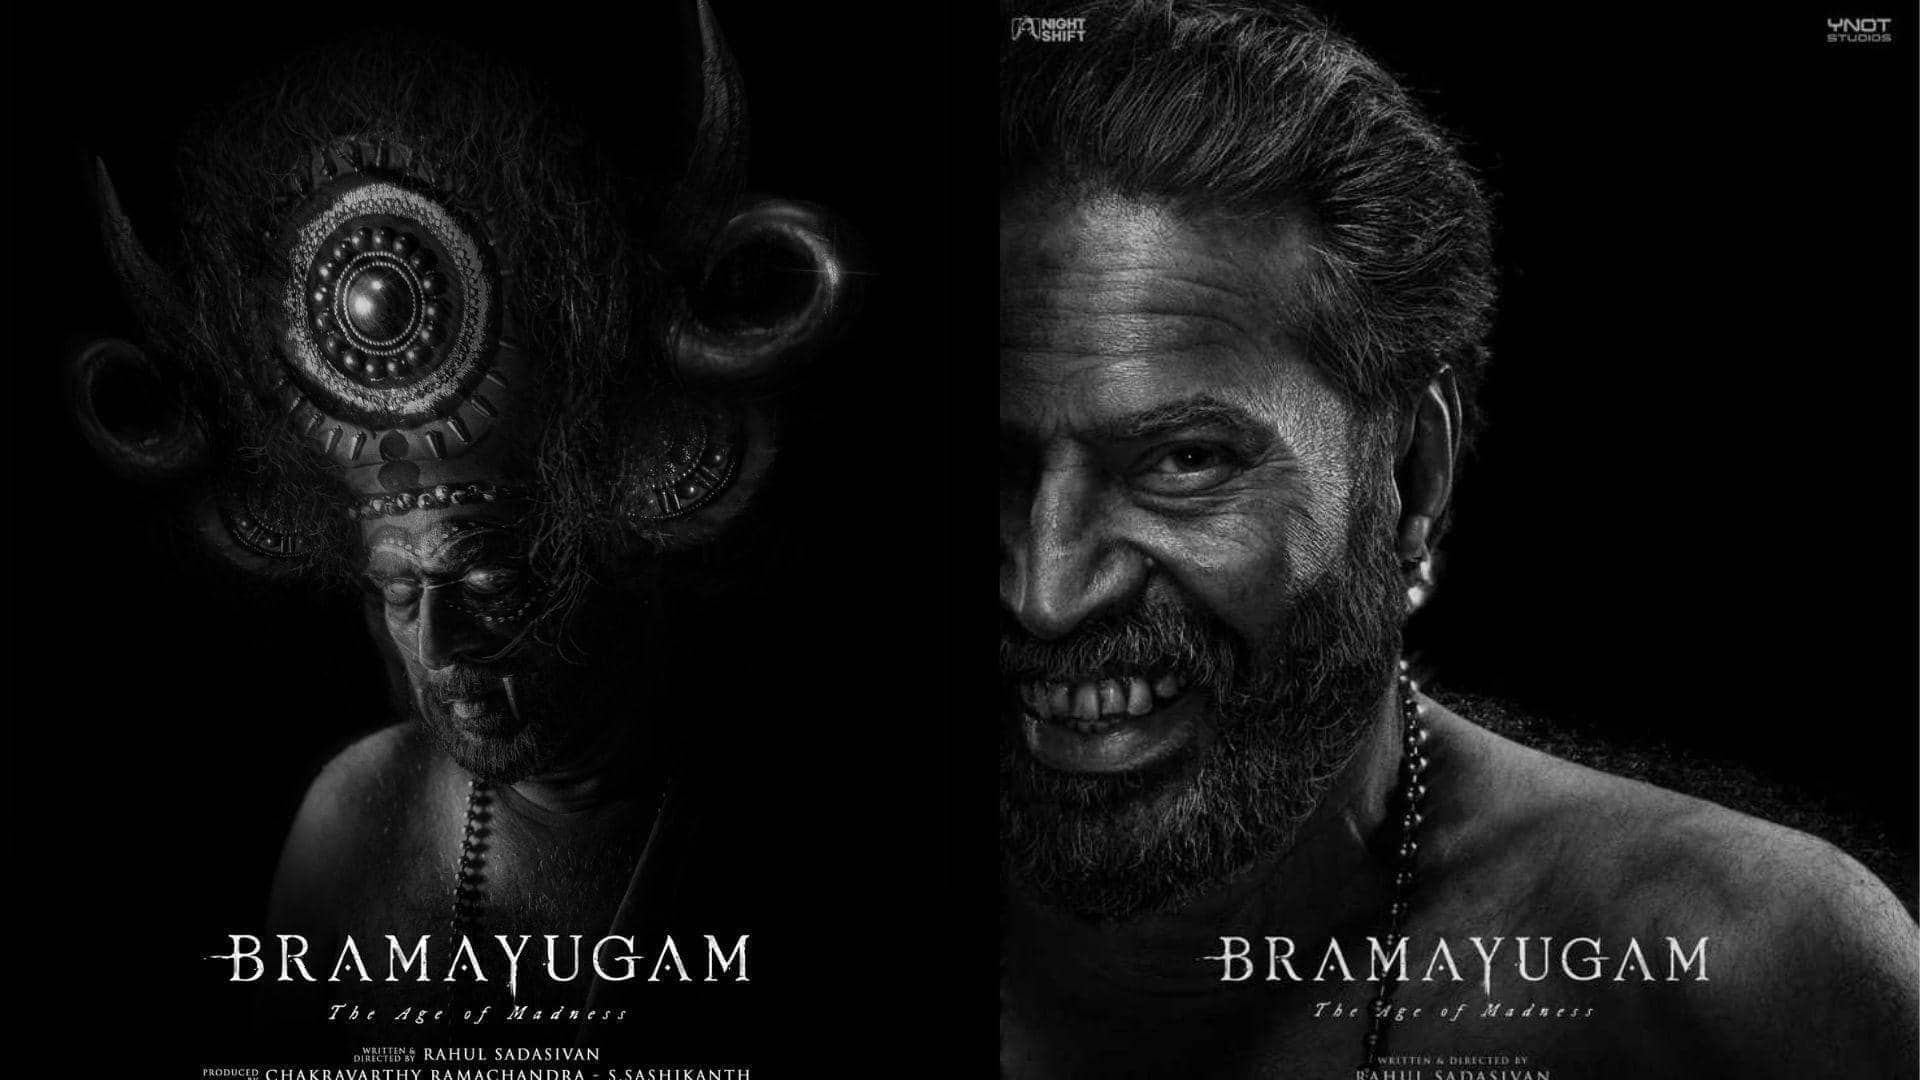 Box office: Mammootty's horror flick 'Bramayugam' recovers on day 9